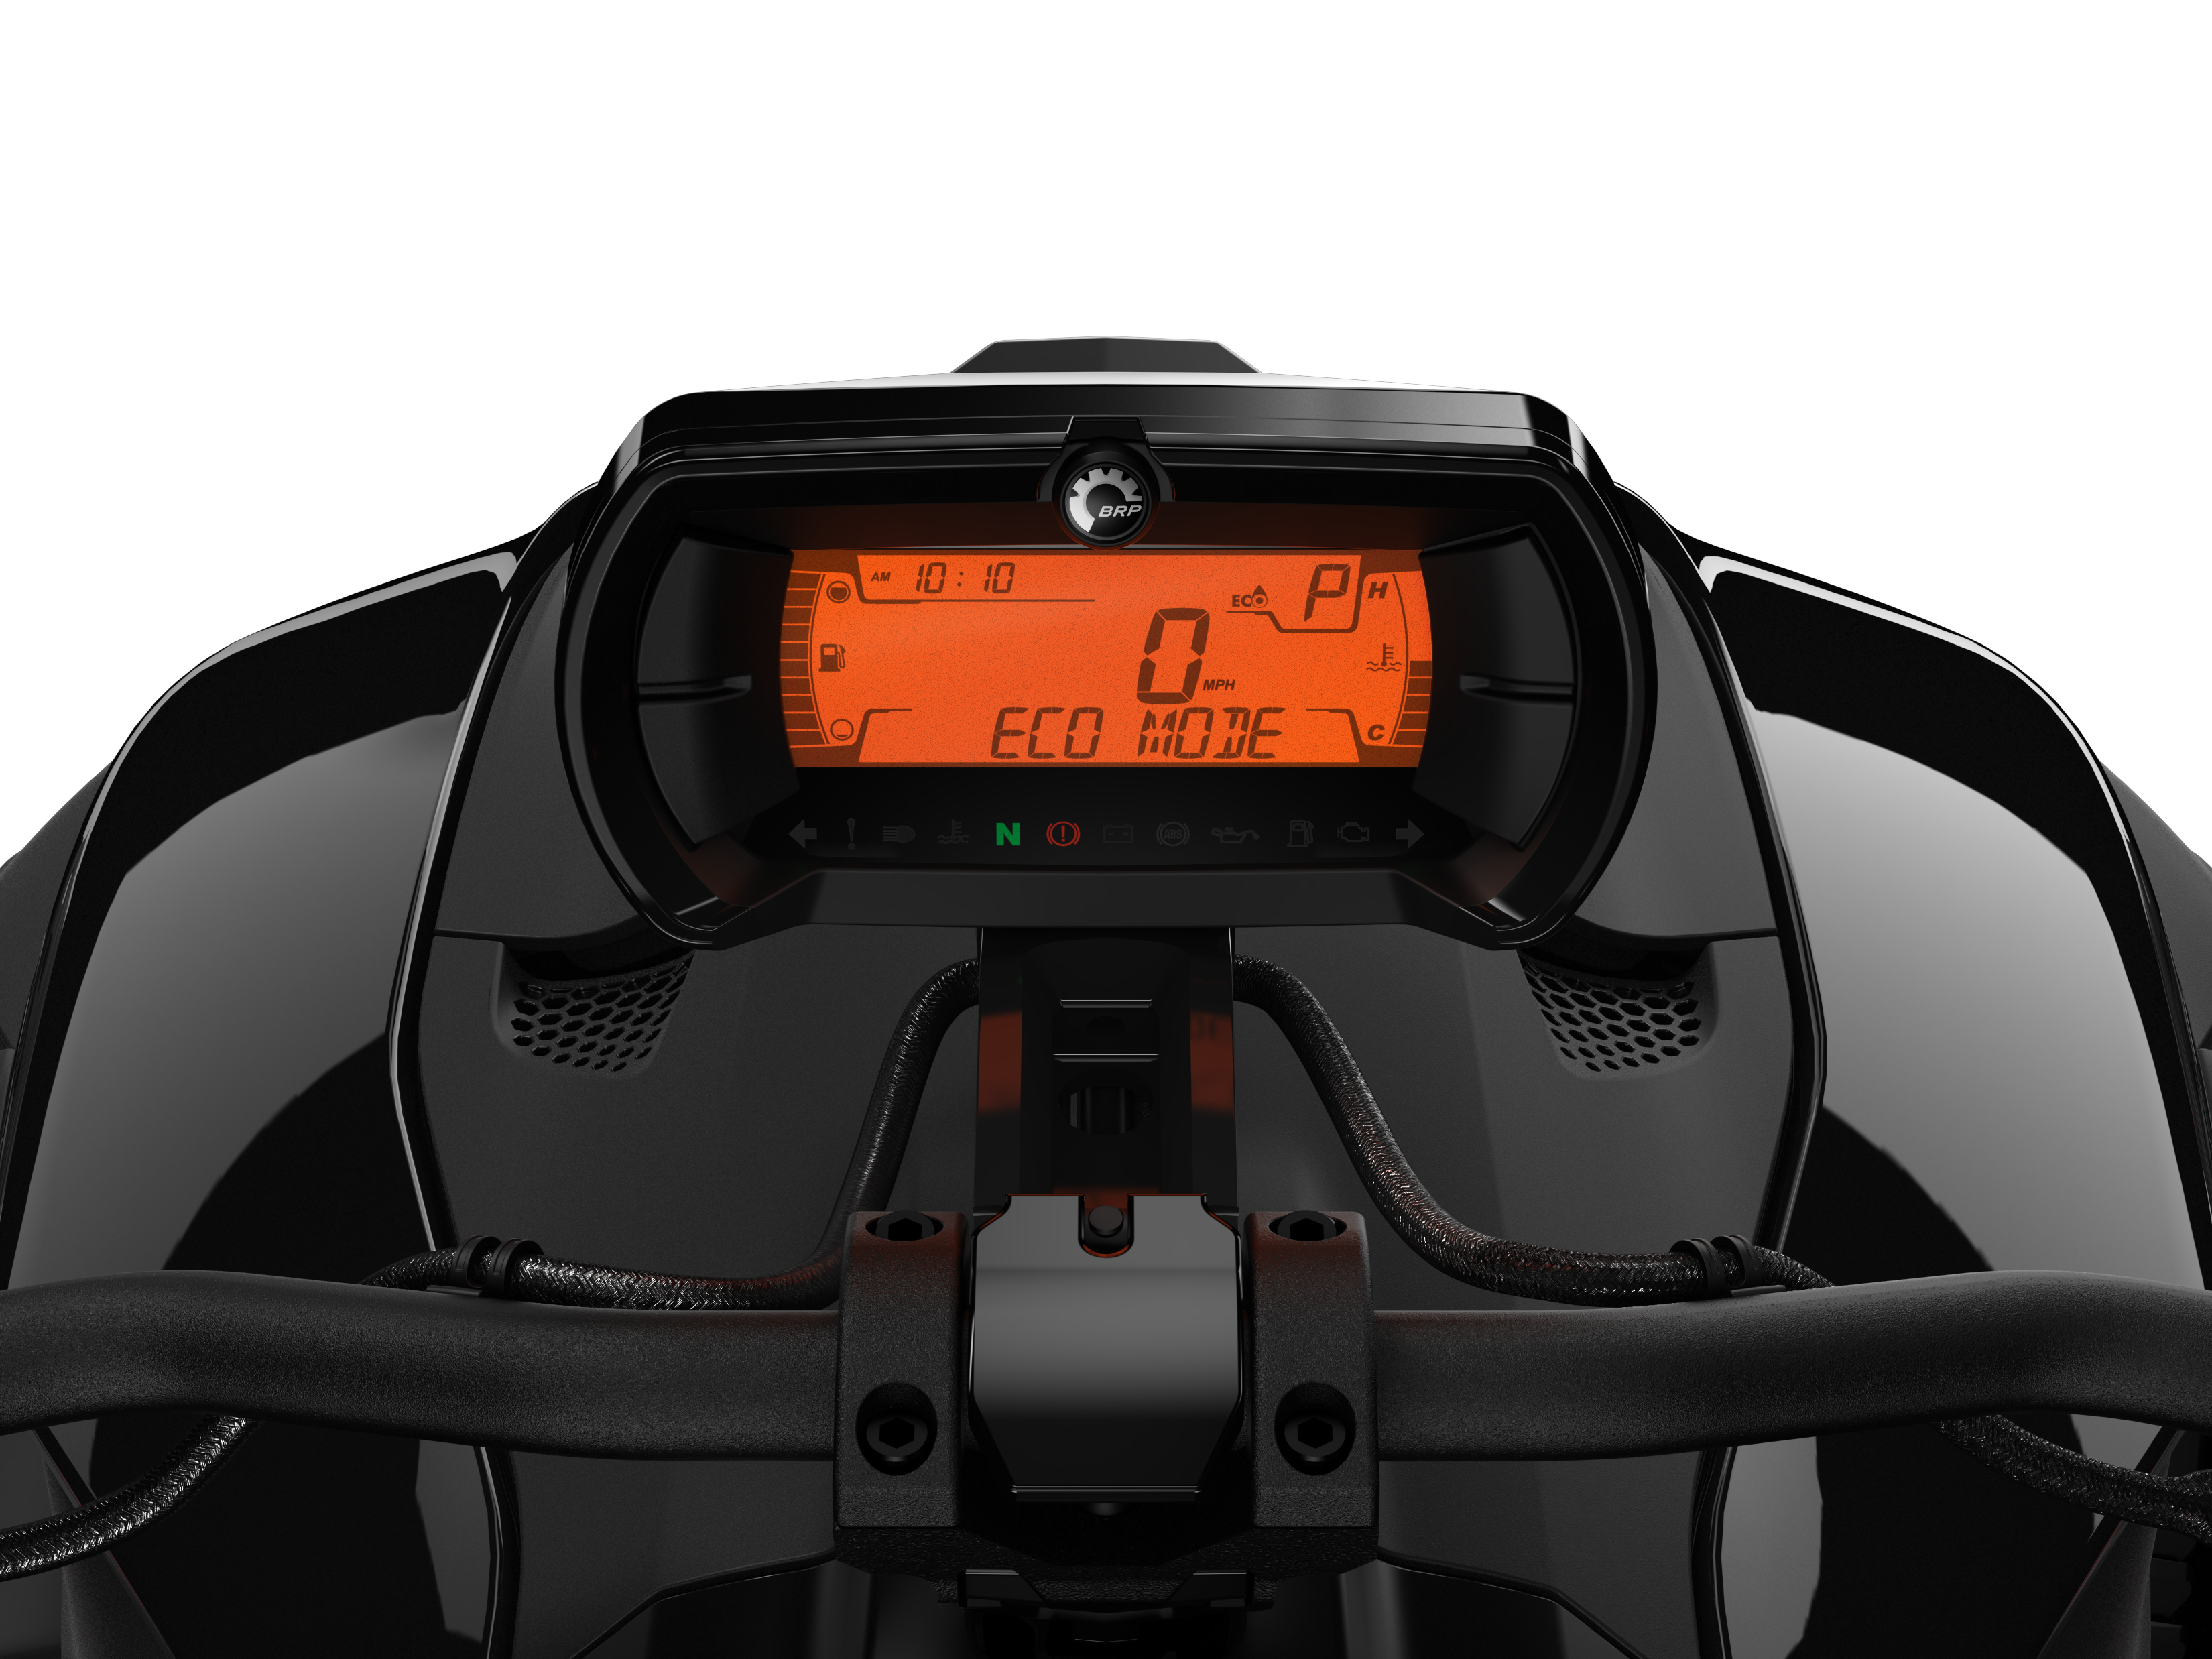 The driver’s seat view of a Can-Am Ryker vehicle’s console with Eco Mode Smart Assist activated